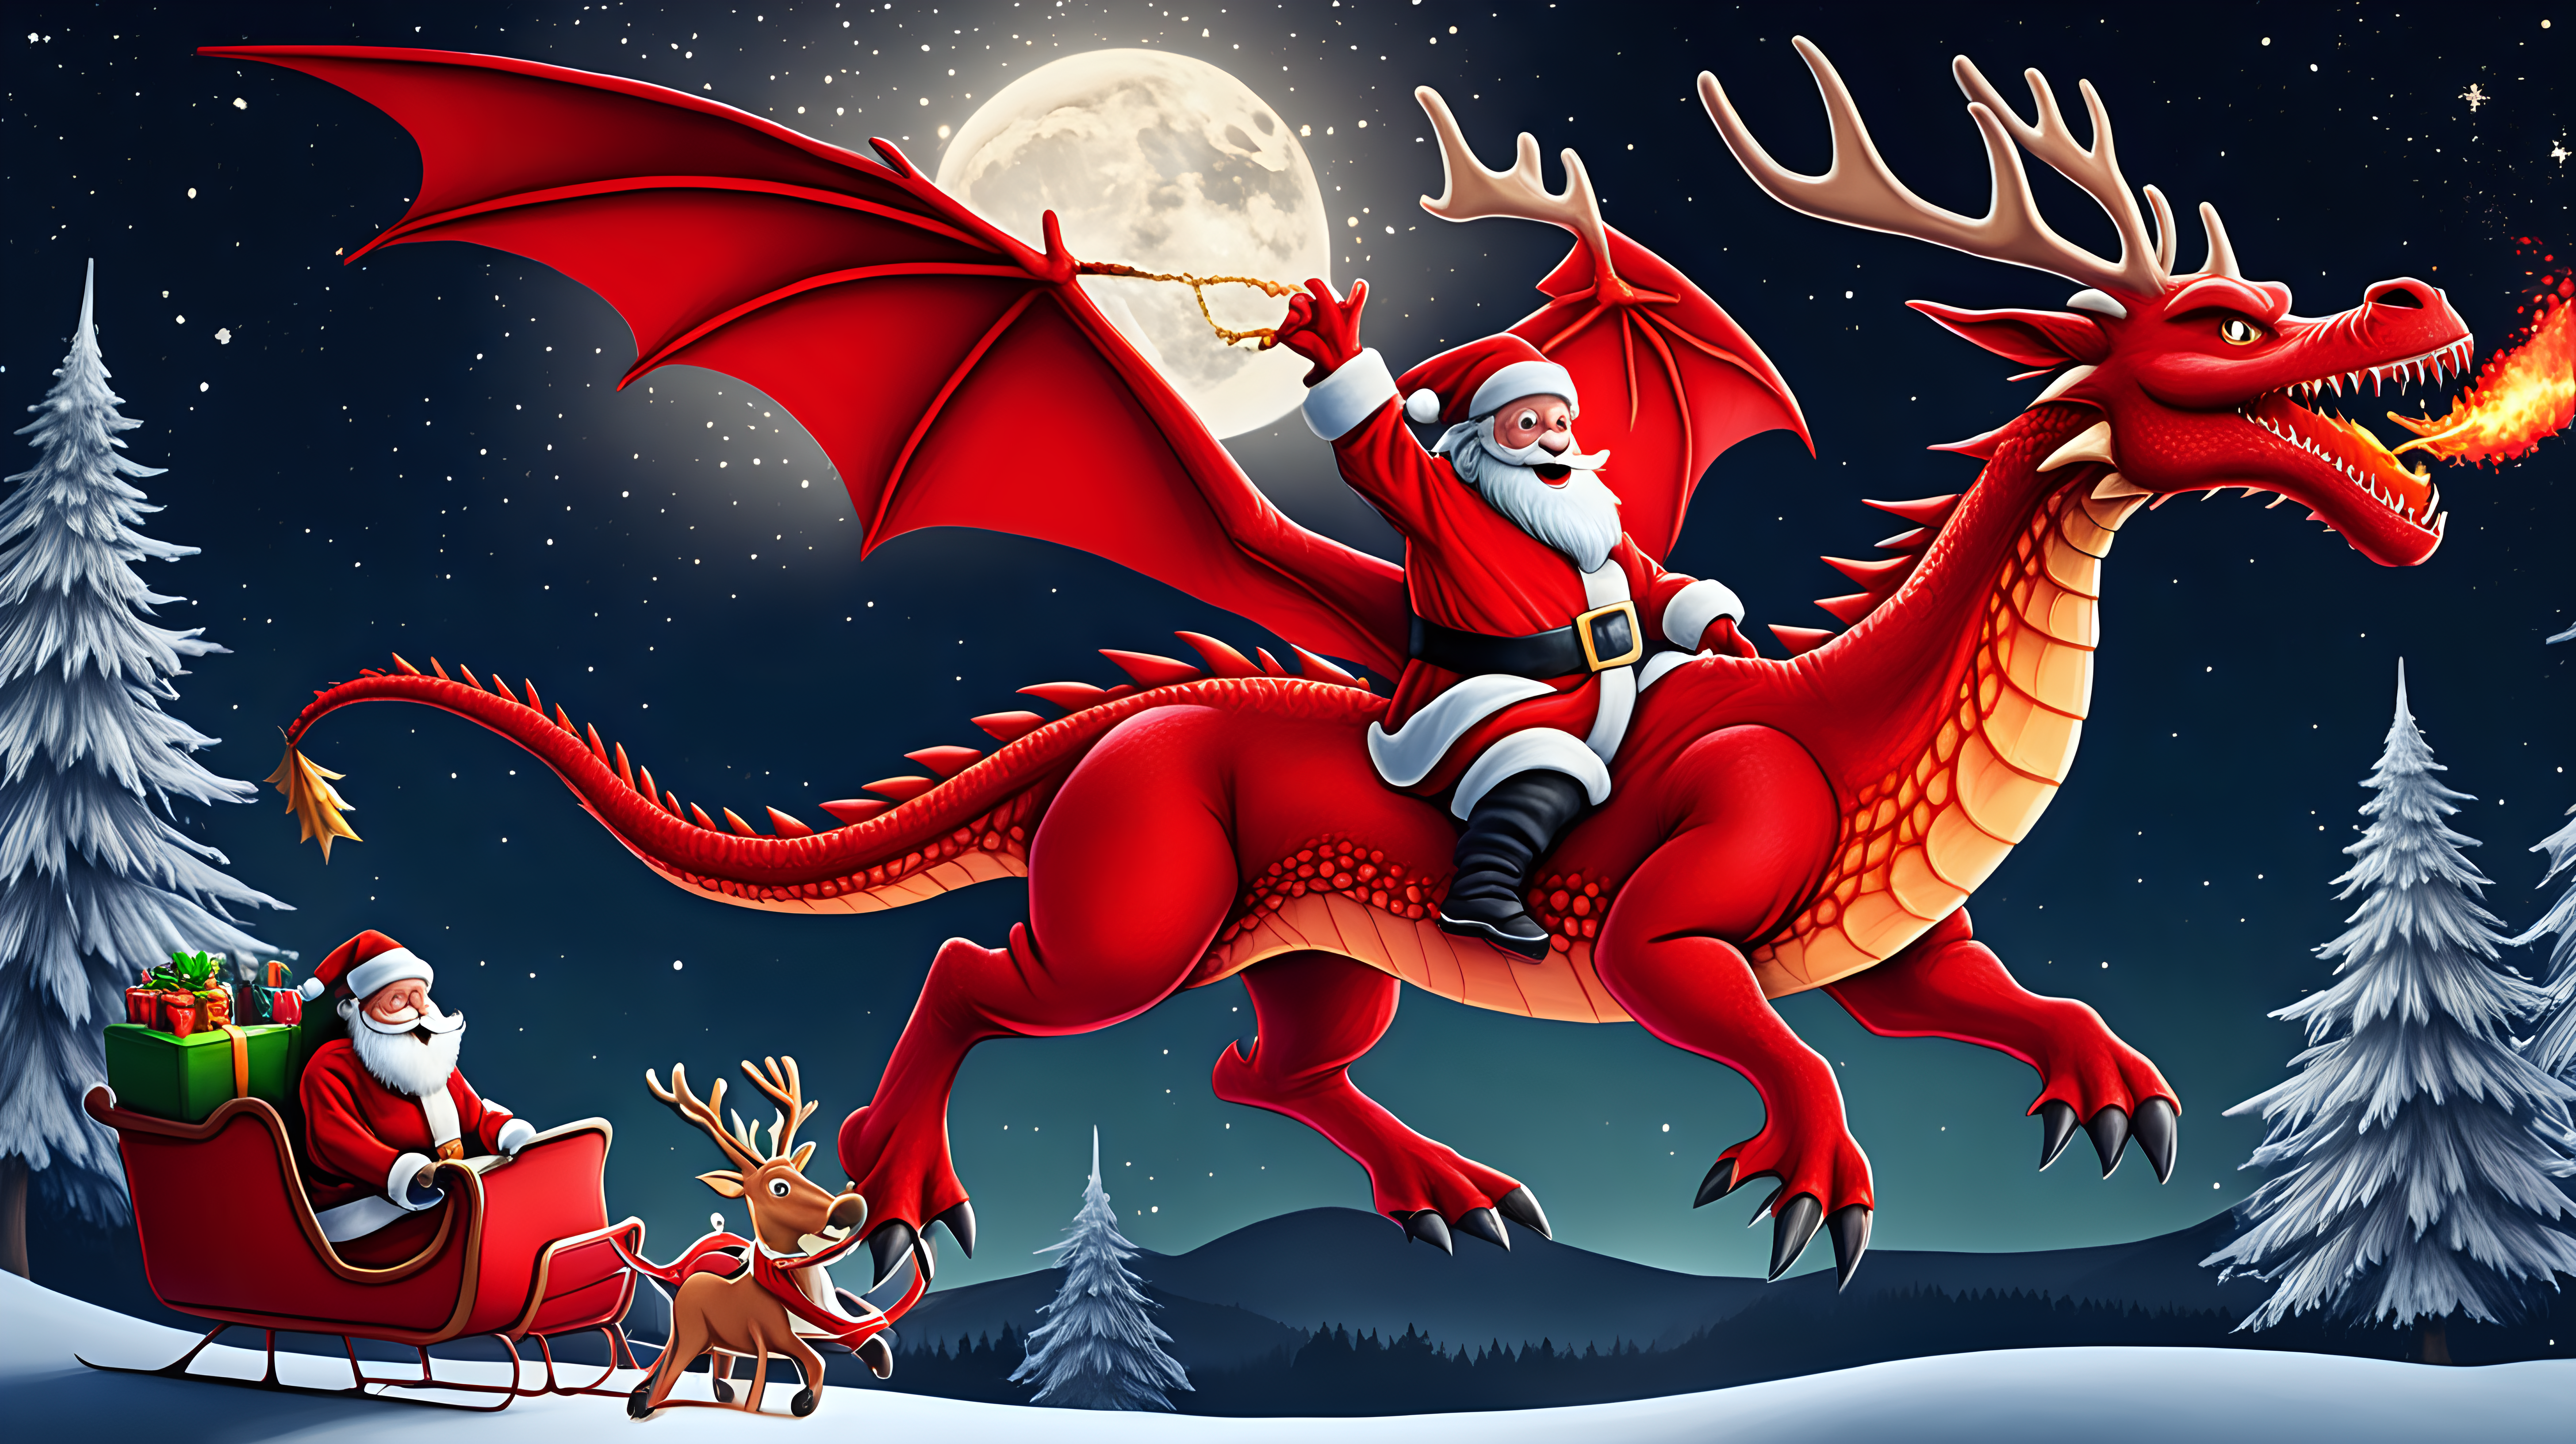 Red fire breathing dragon chasing Santa and his